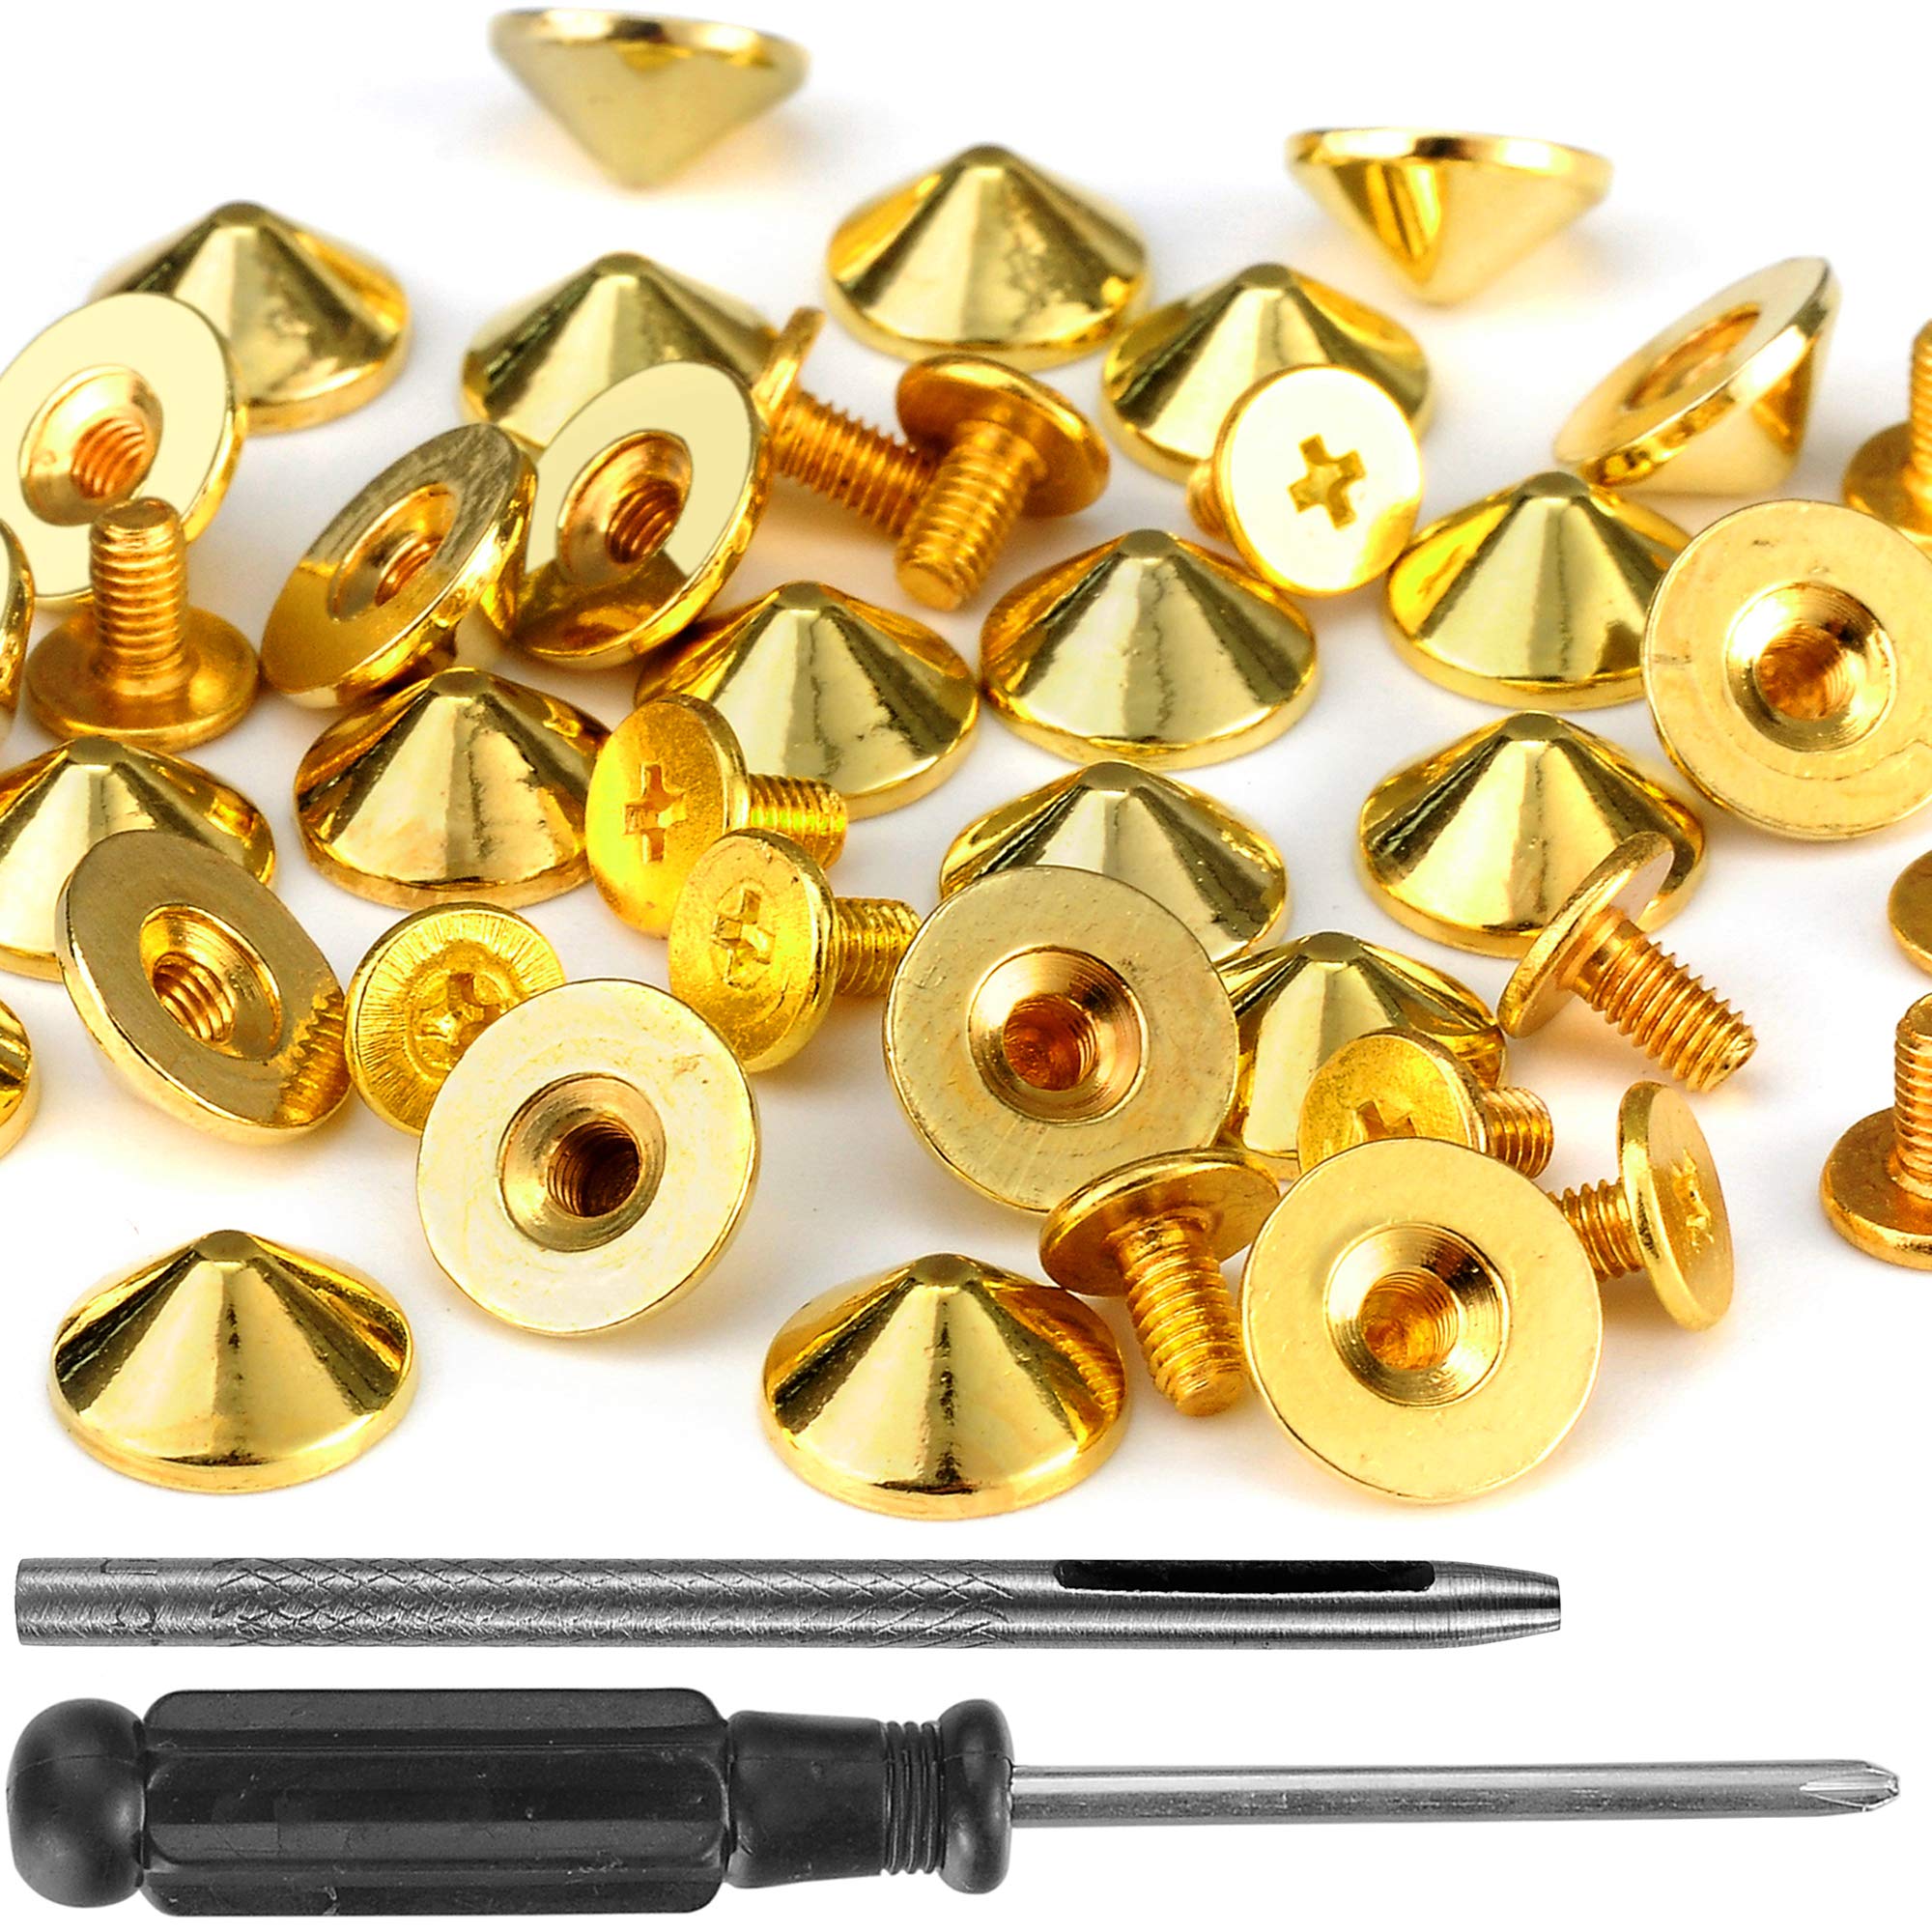 YORANYO 100 Sets Cone Spikes and Studs 4.7MM Height Gold Color 3